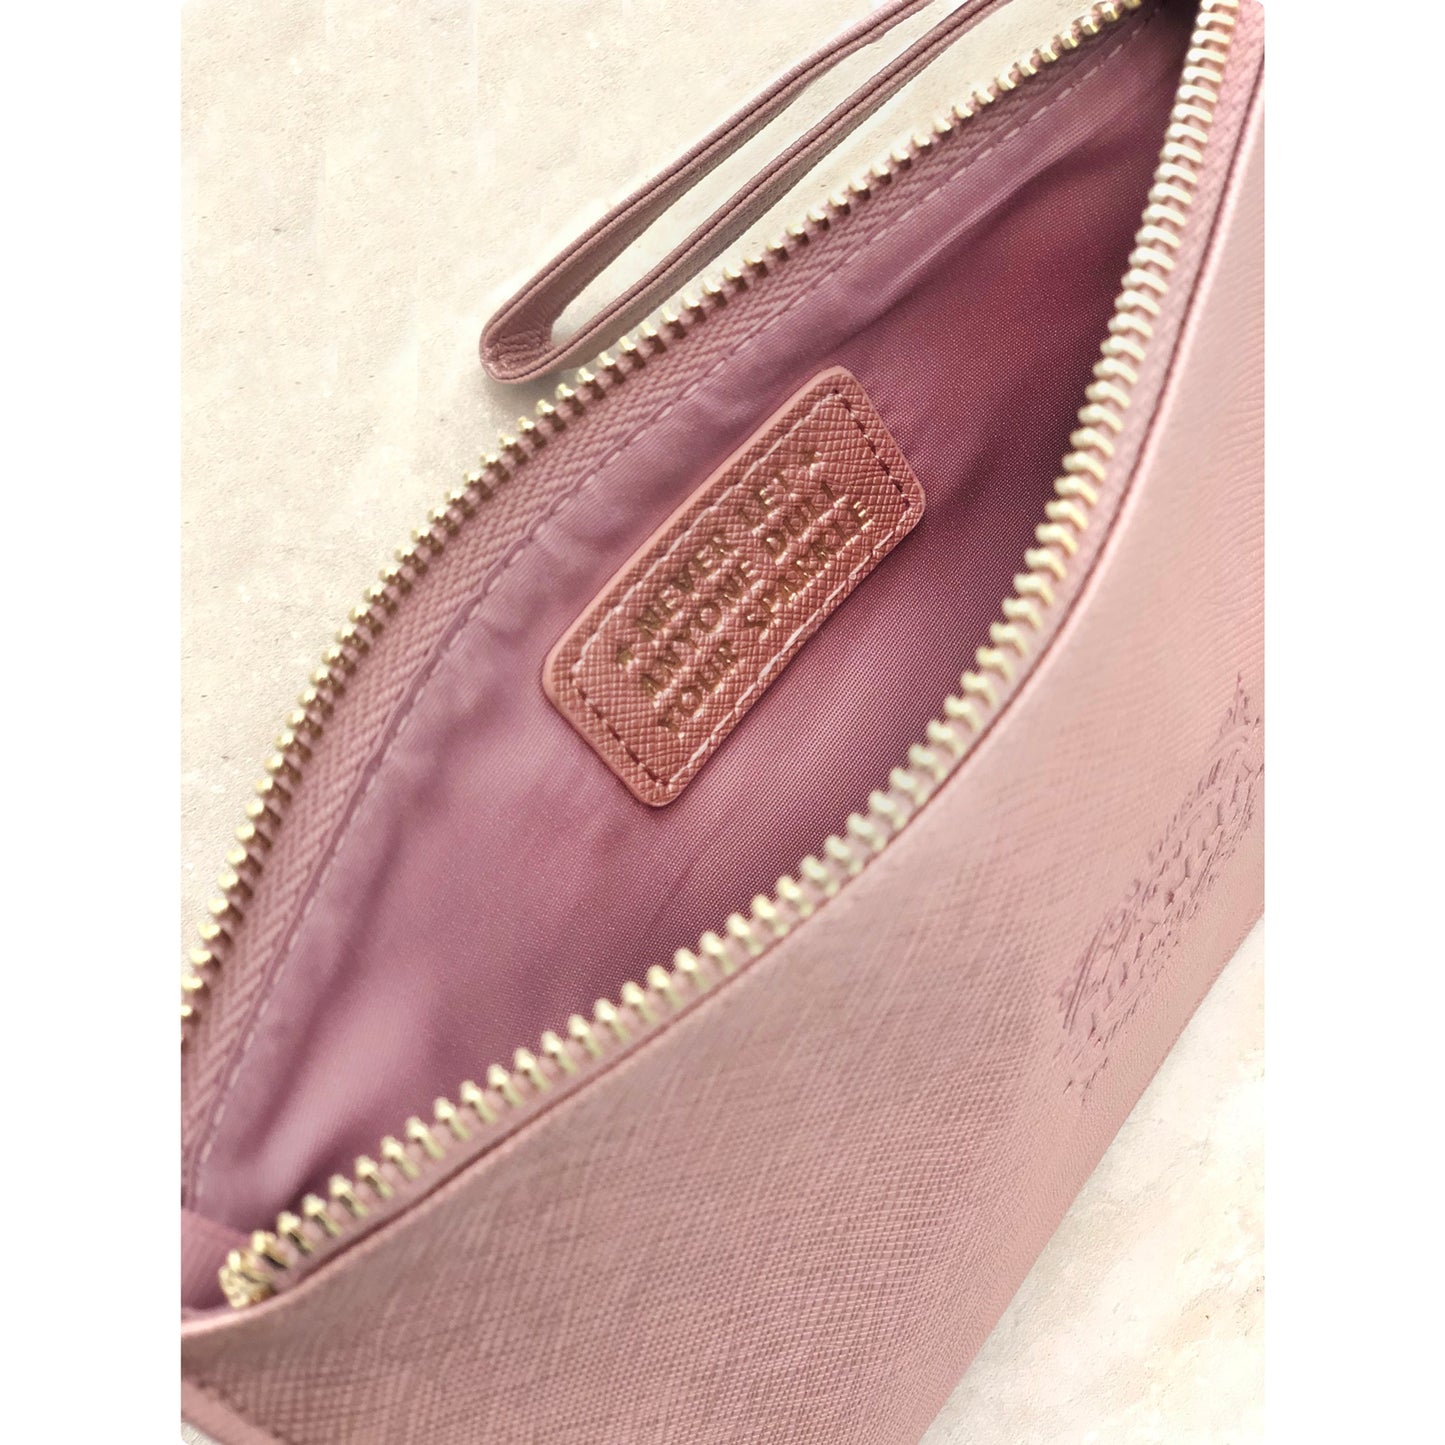 Clutch Bag With Handle & Embossed Text "Grace"